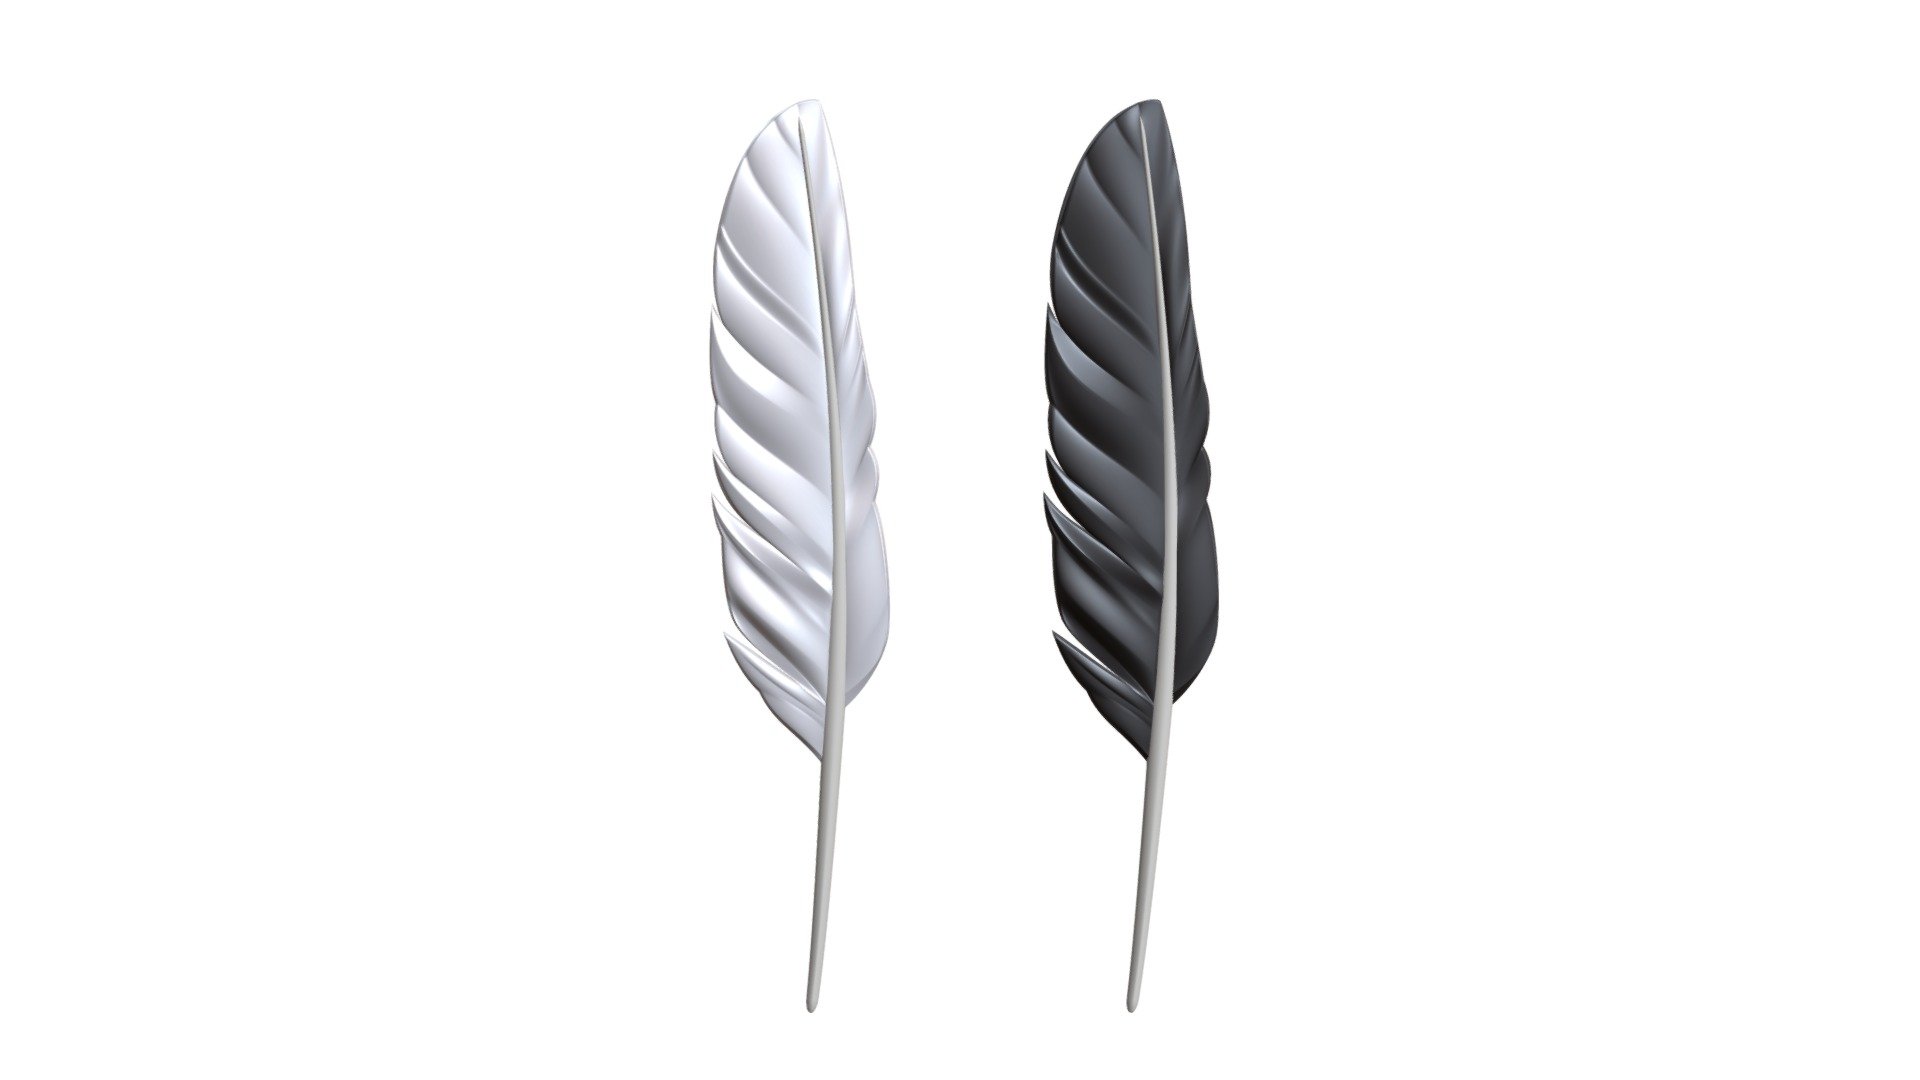 Highpoly hardsurface model, ready for 3D-print or CNC. Copy from nature. One feather has a flat back.

Size White: 10 x 2 x 50 mm. Volume: 0,21 cm3.

Size Black: 10 x 1,5 x 50 mm. Volume: 0,26 cm3 3d model